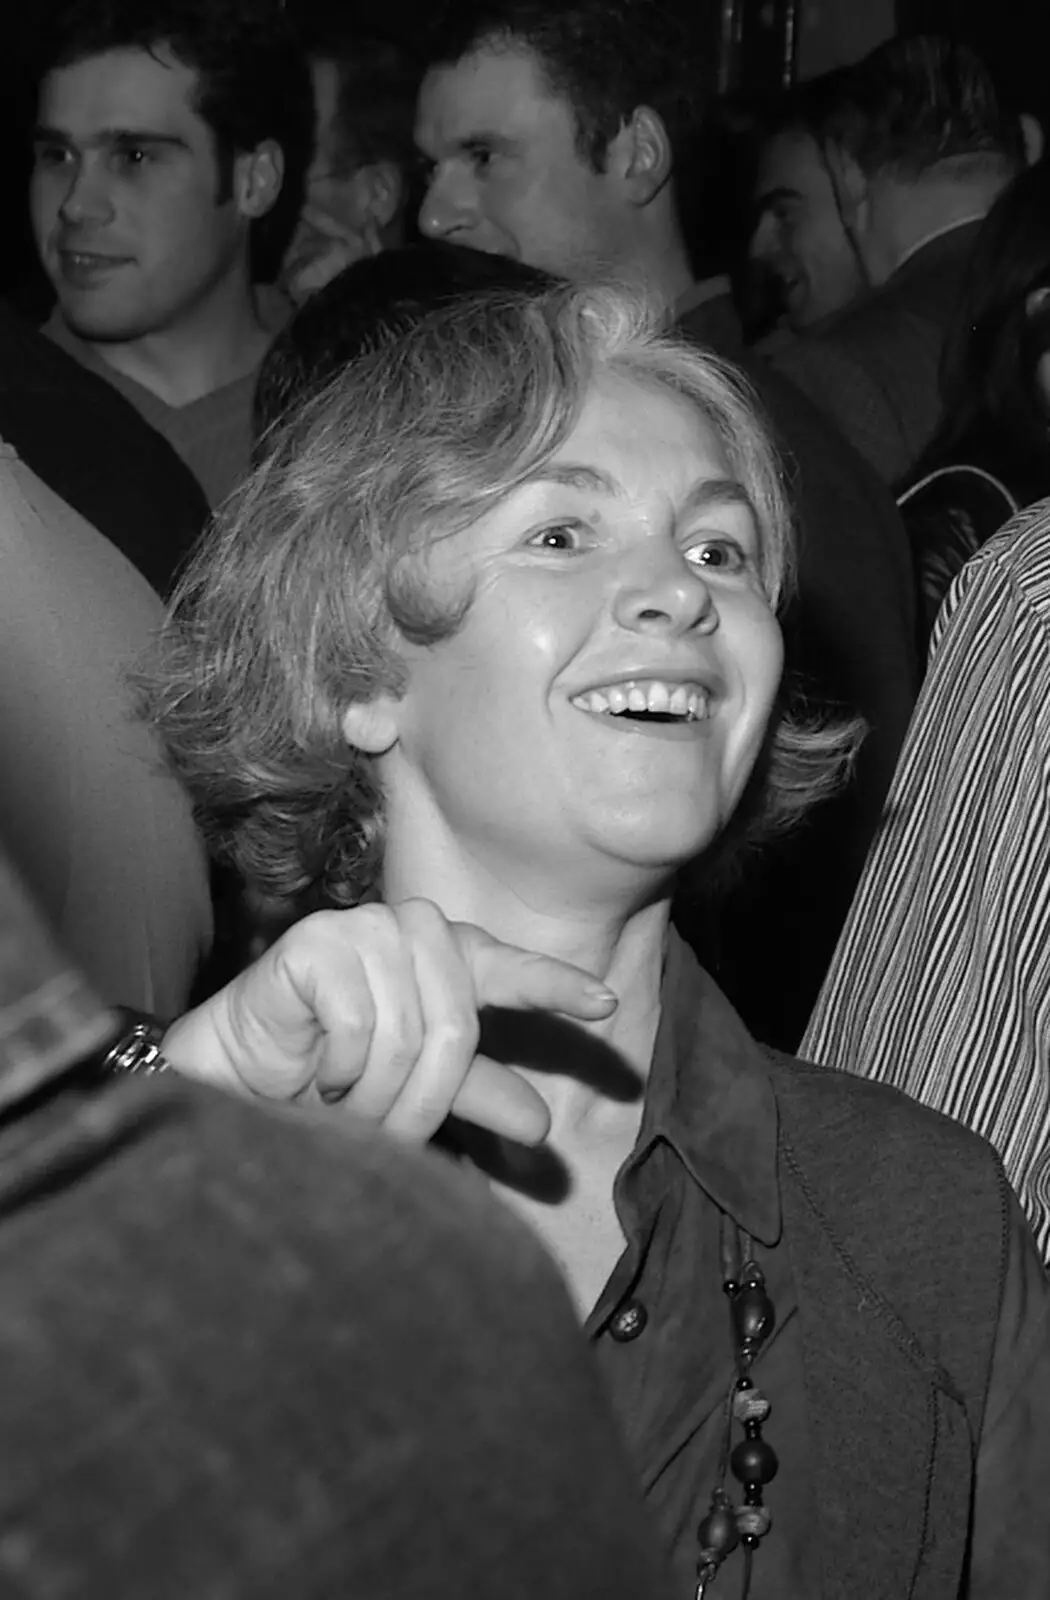 Someone in the crowd smiles, from Tsunami-Aid at the Greyhound, Botesdale, Suffolk - 5th February 2005